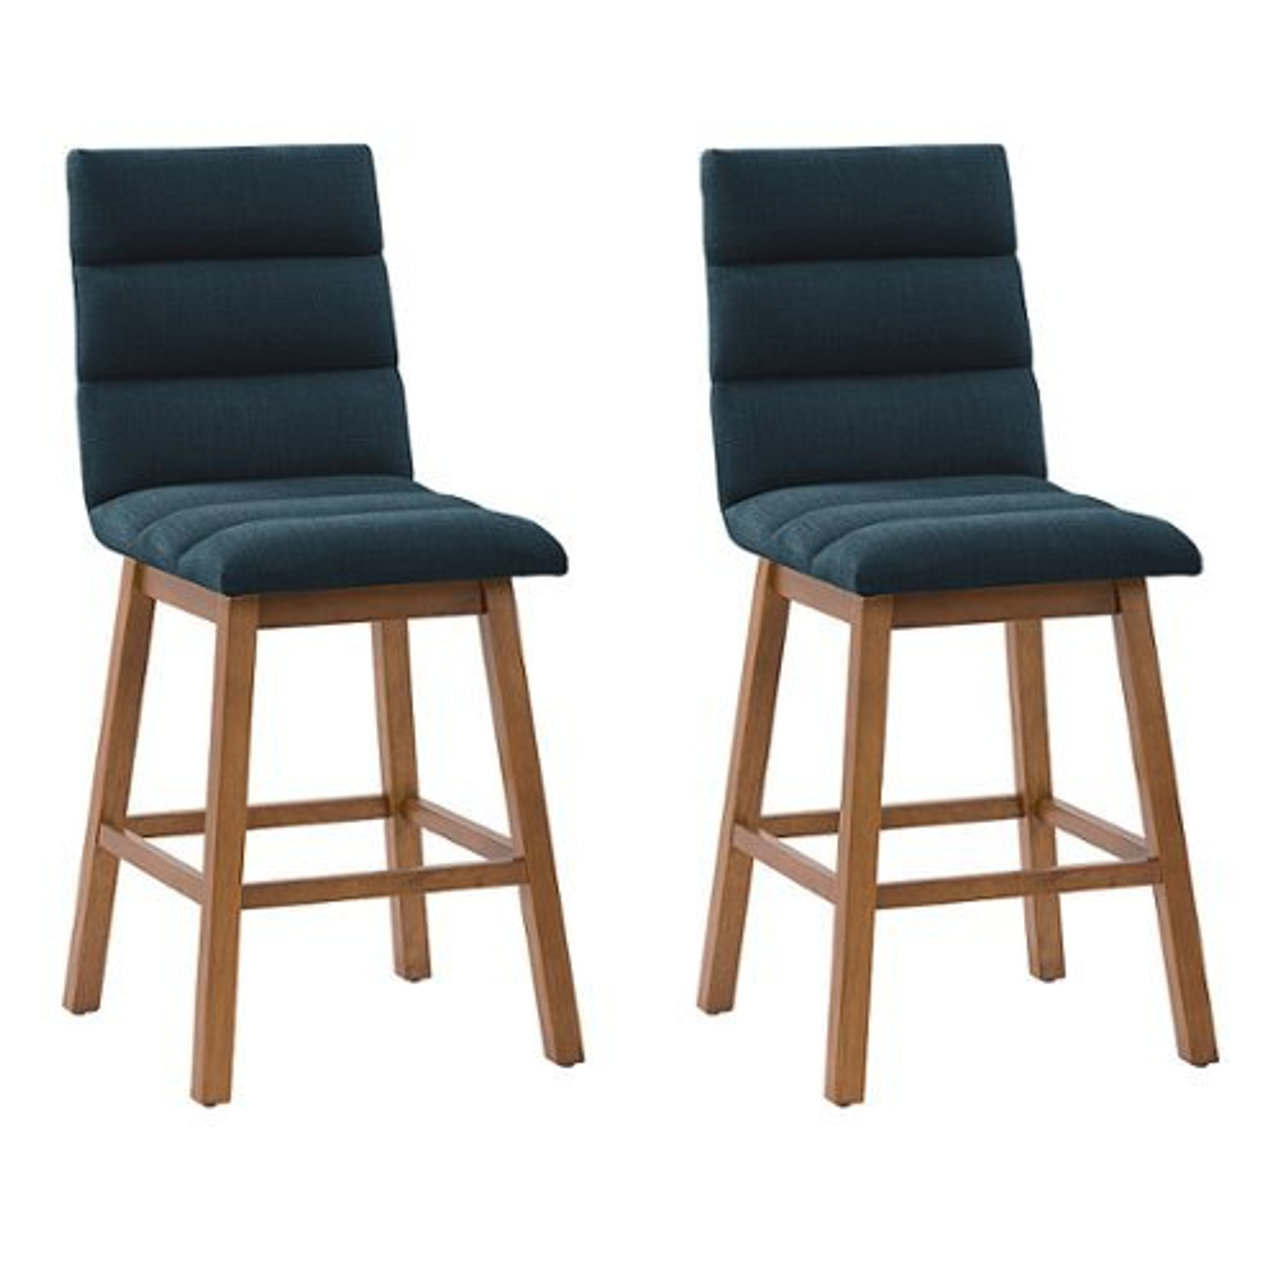 CorLiving - Boston Channel Tufted Fabric Barstool (set of 2) - Navy Blue